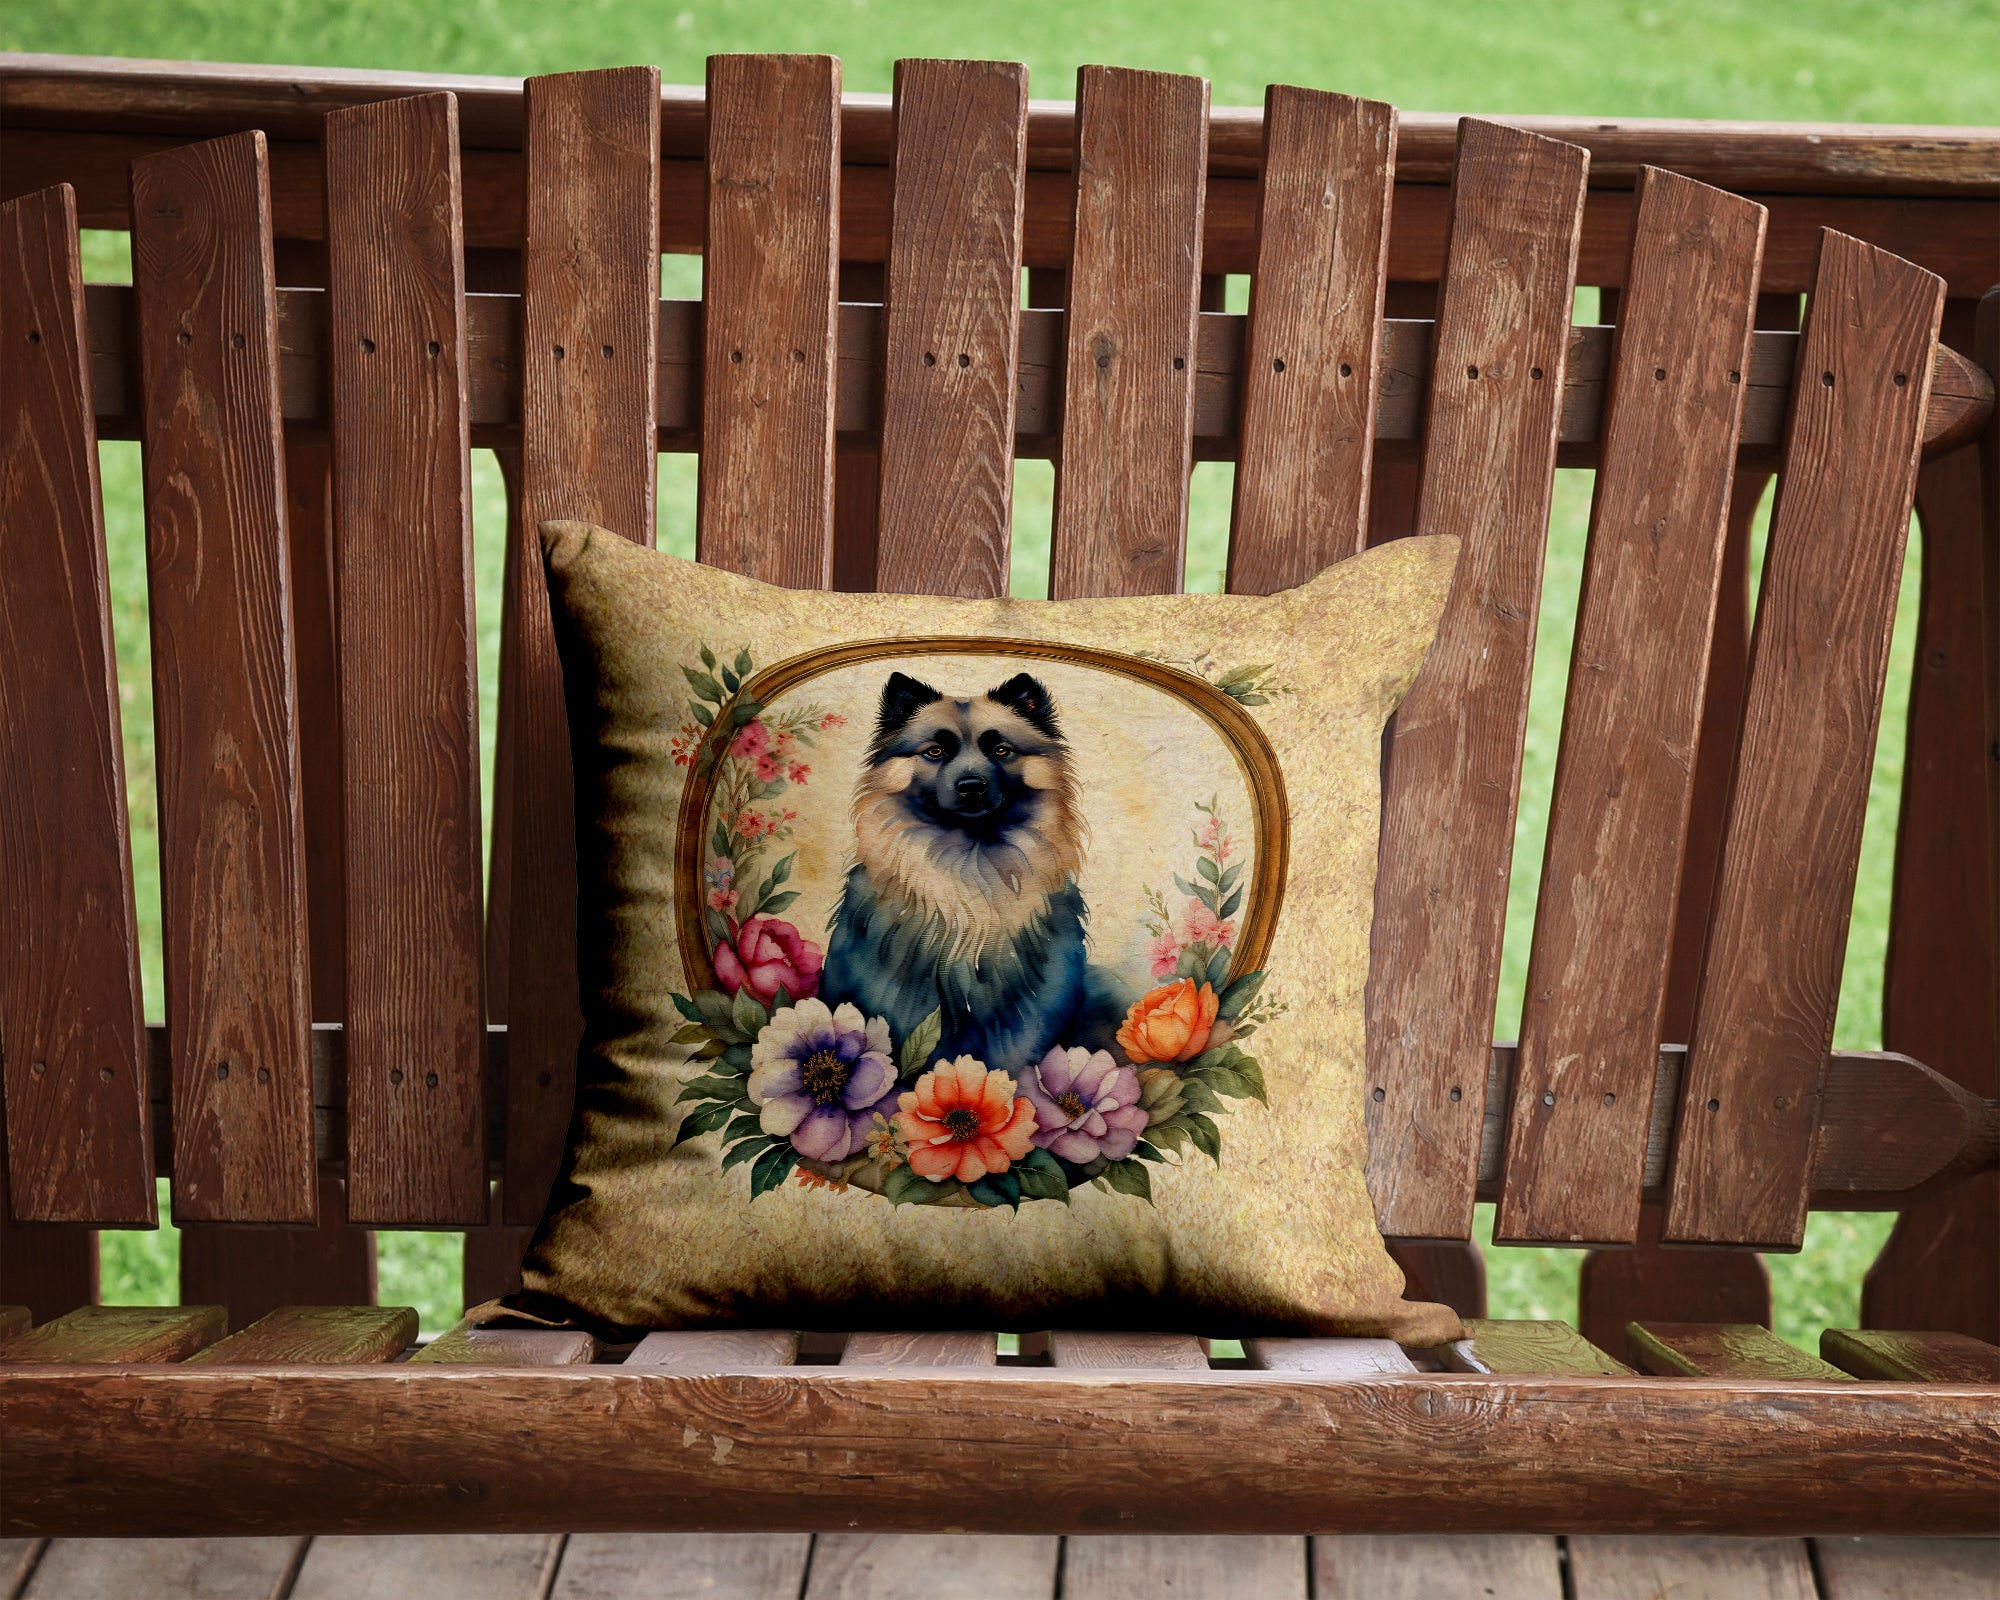 Buy this Keeshond and Flowers Fabric Decorative Pillow